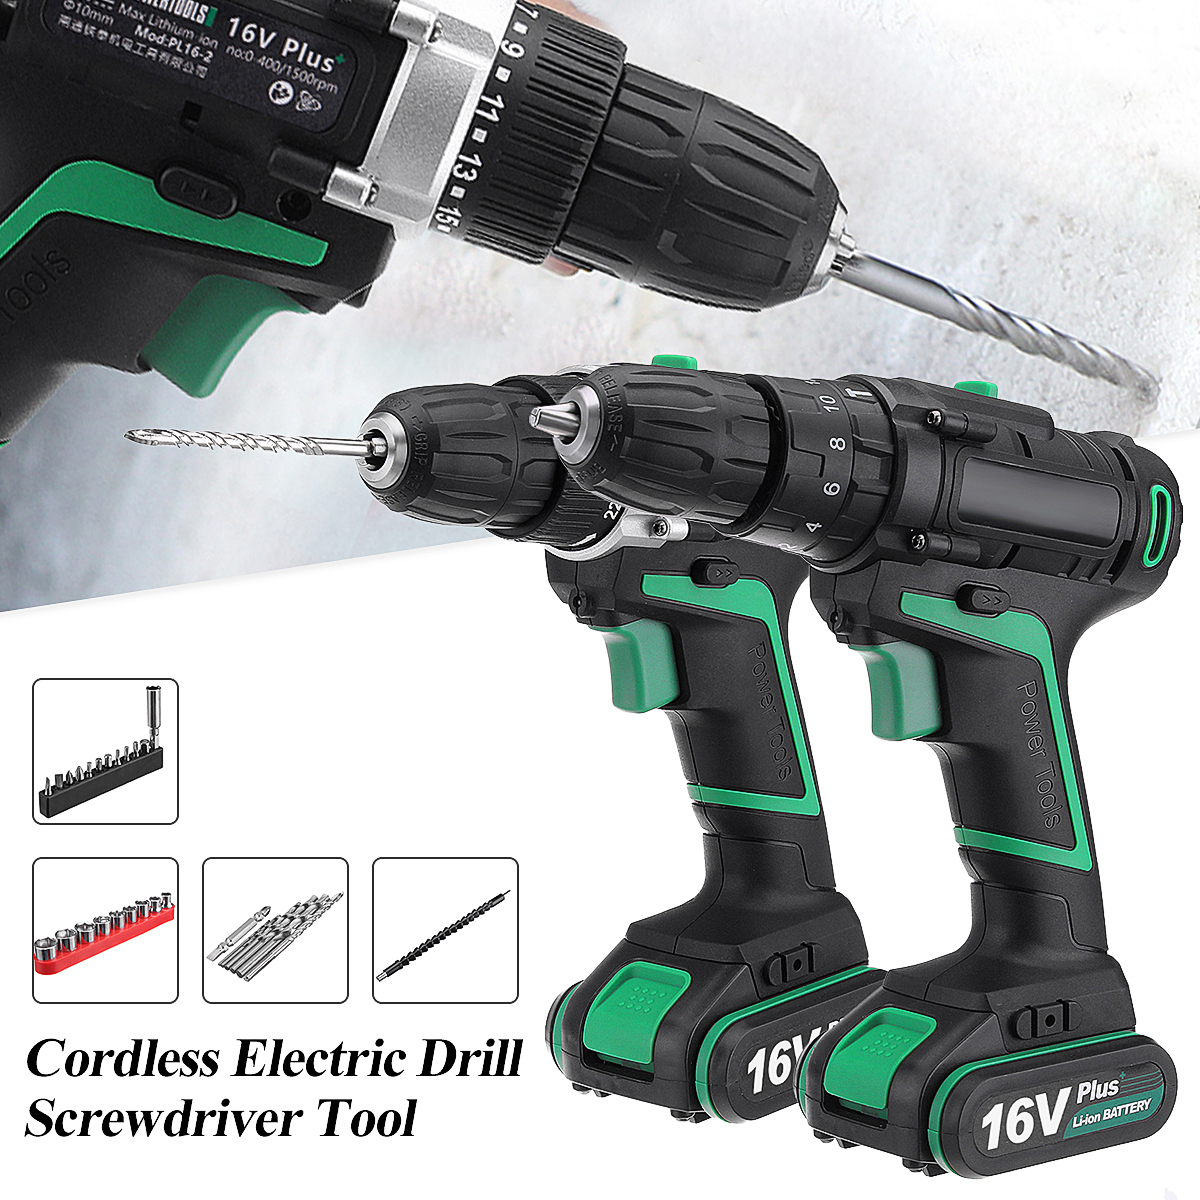 AC-100-240V-Lithium-Cordless-Electric-Screwdriver-Screw-Drill-Driver-Tool-15Ah-1-Charger-1-Battery-1286920-7